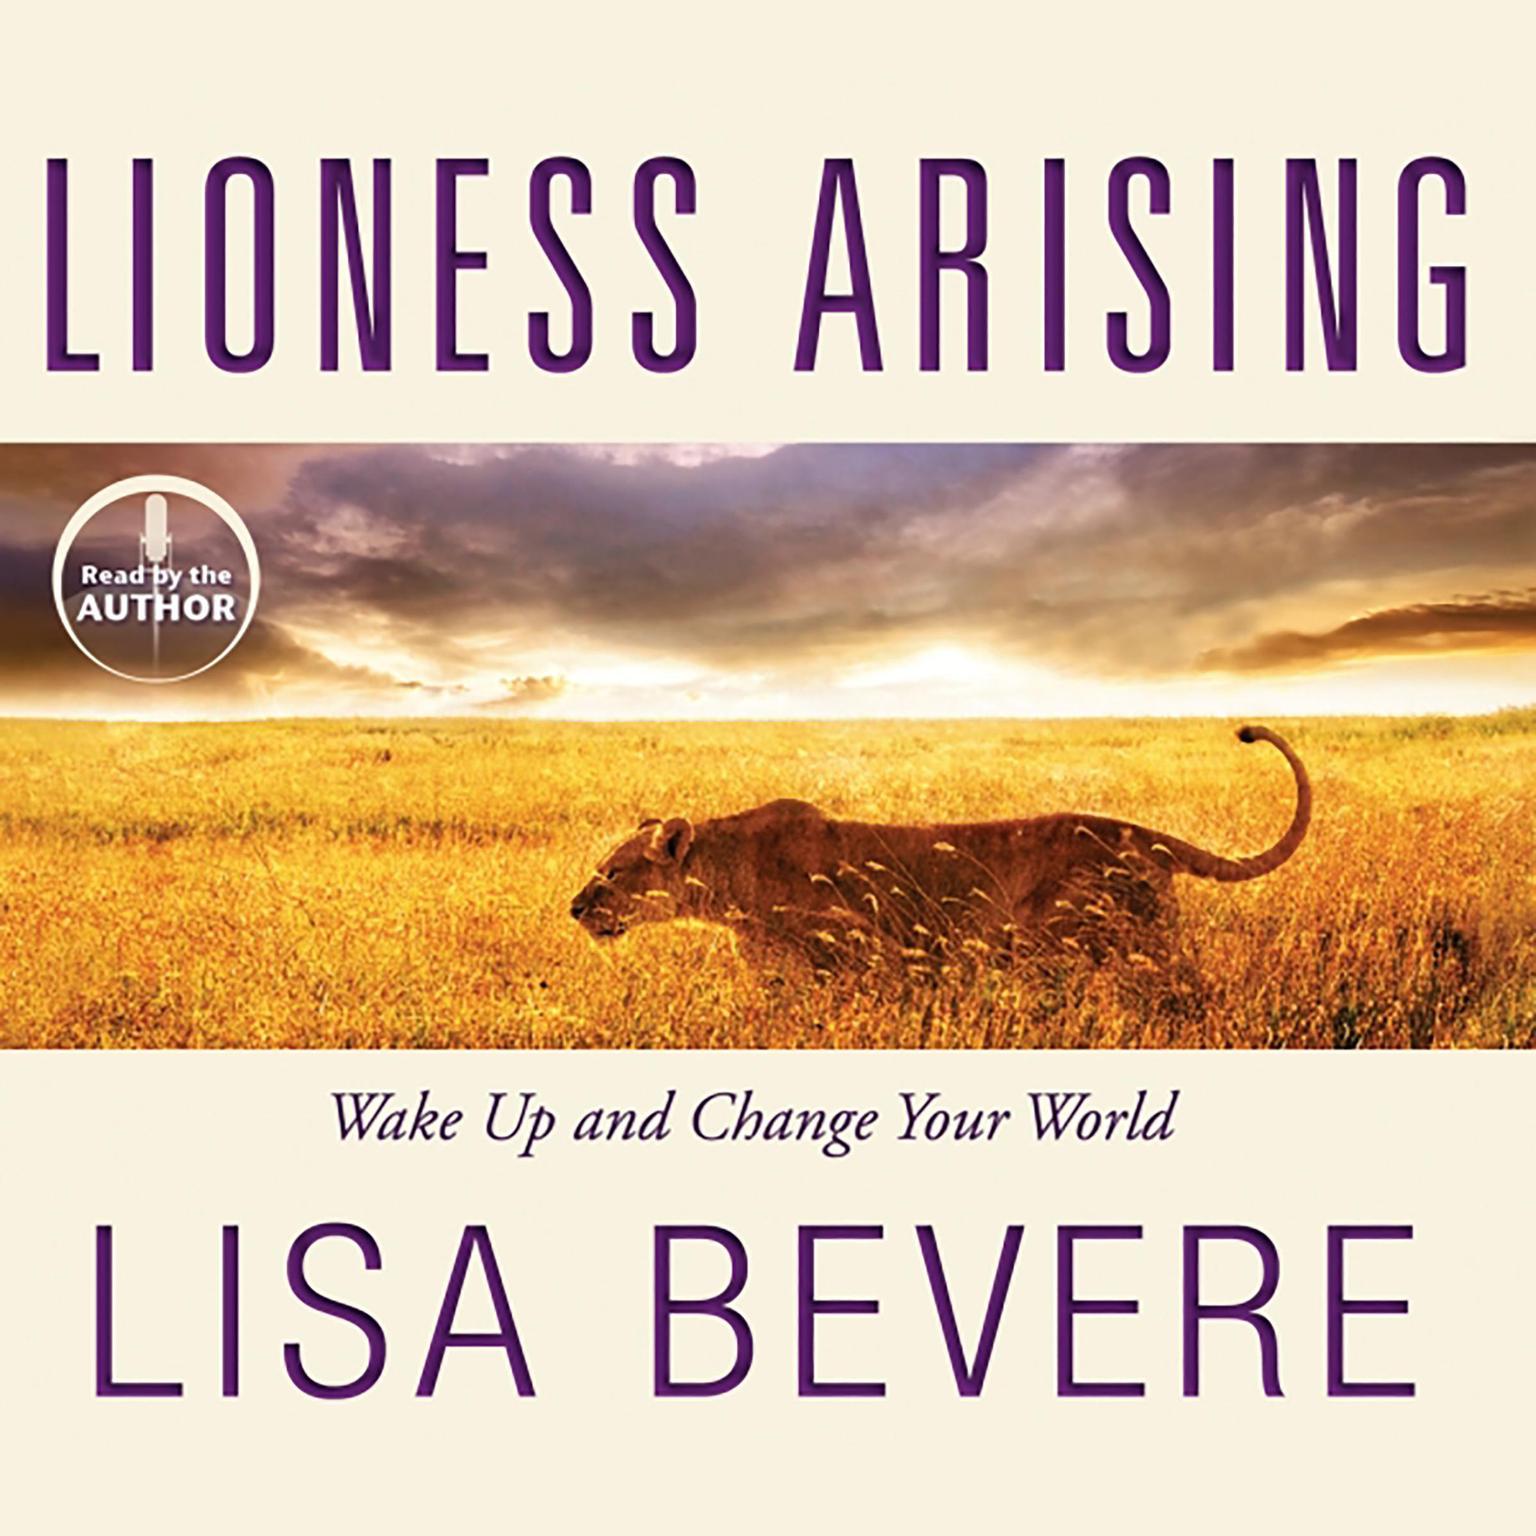 Lioness Arising: Wake Up and Change Your World Audiobook, by Lisa Bevere